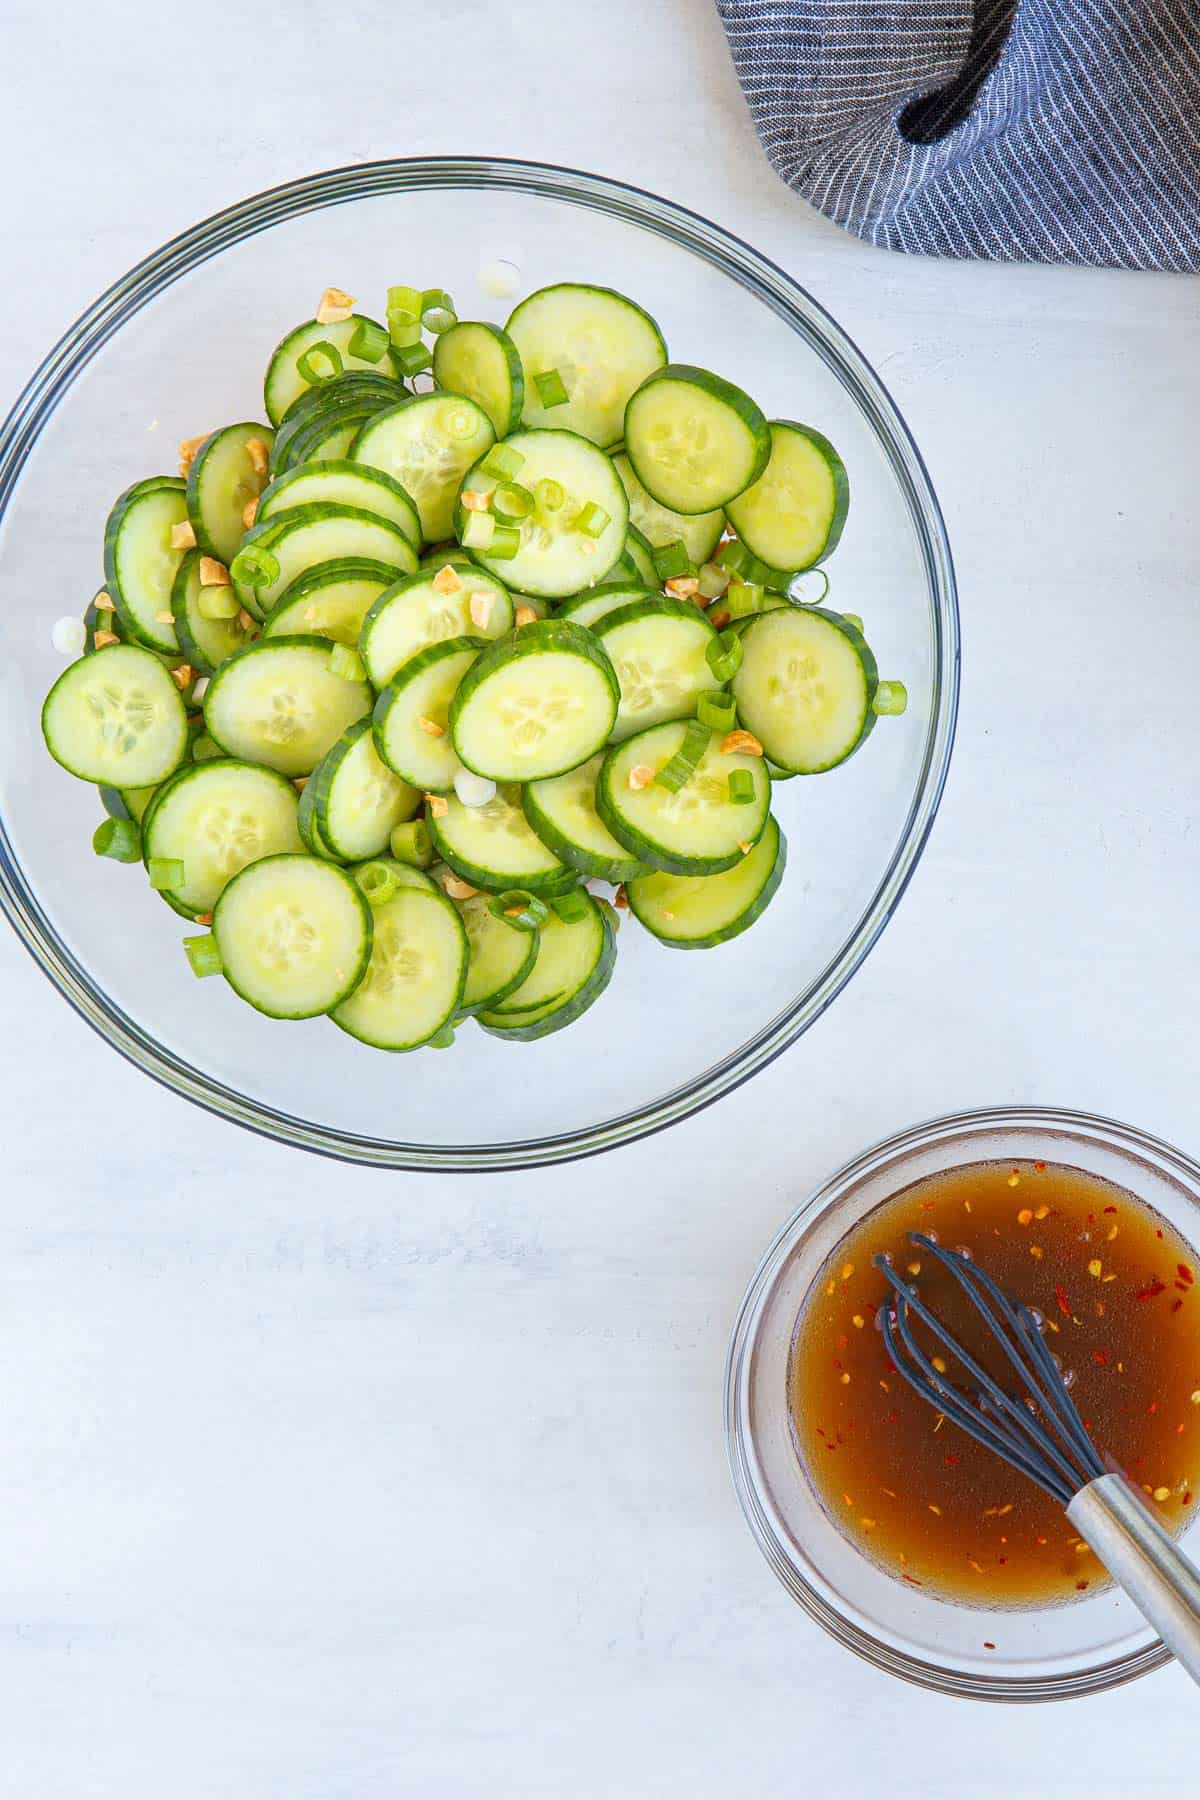 Overhead view of a bowl of sliced cucumbers, onions and peanuts beside a bowl of Thai dressing.